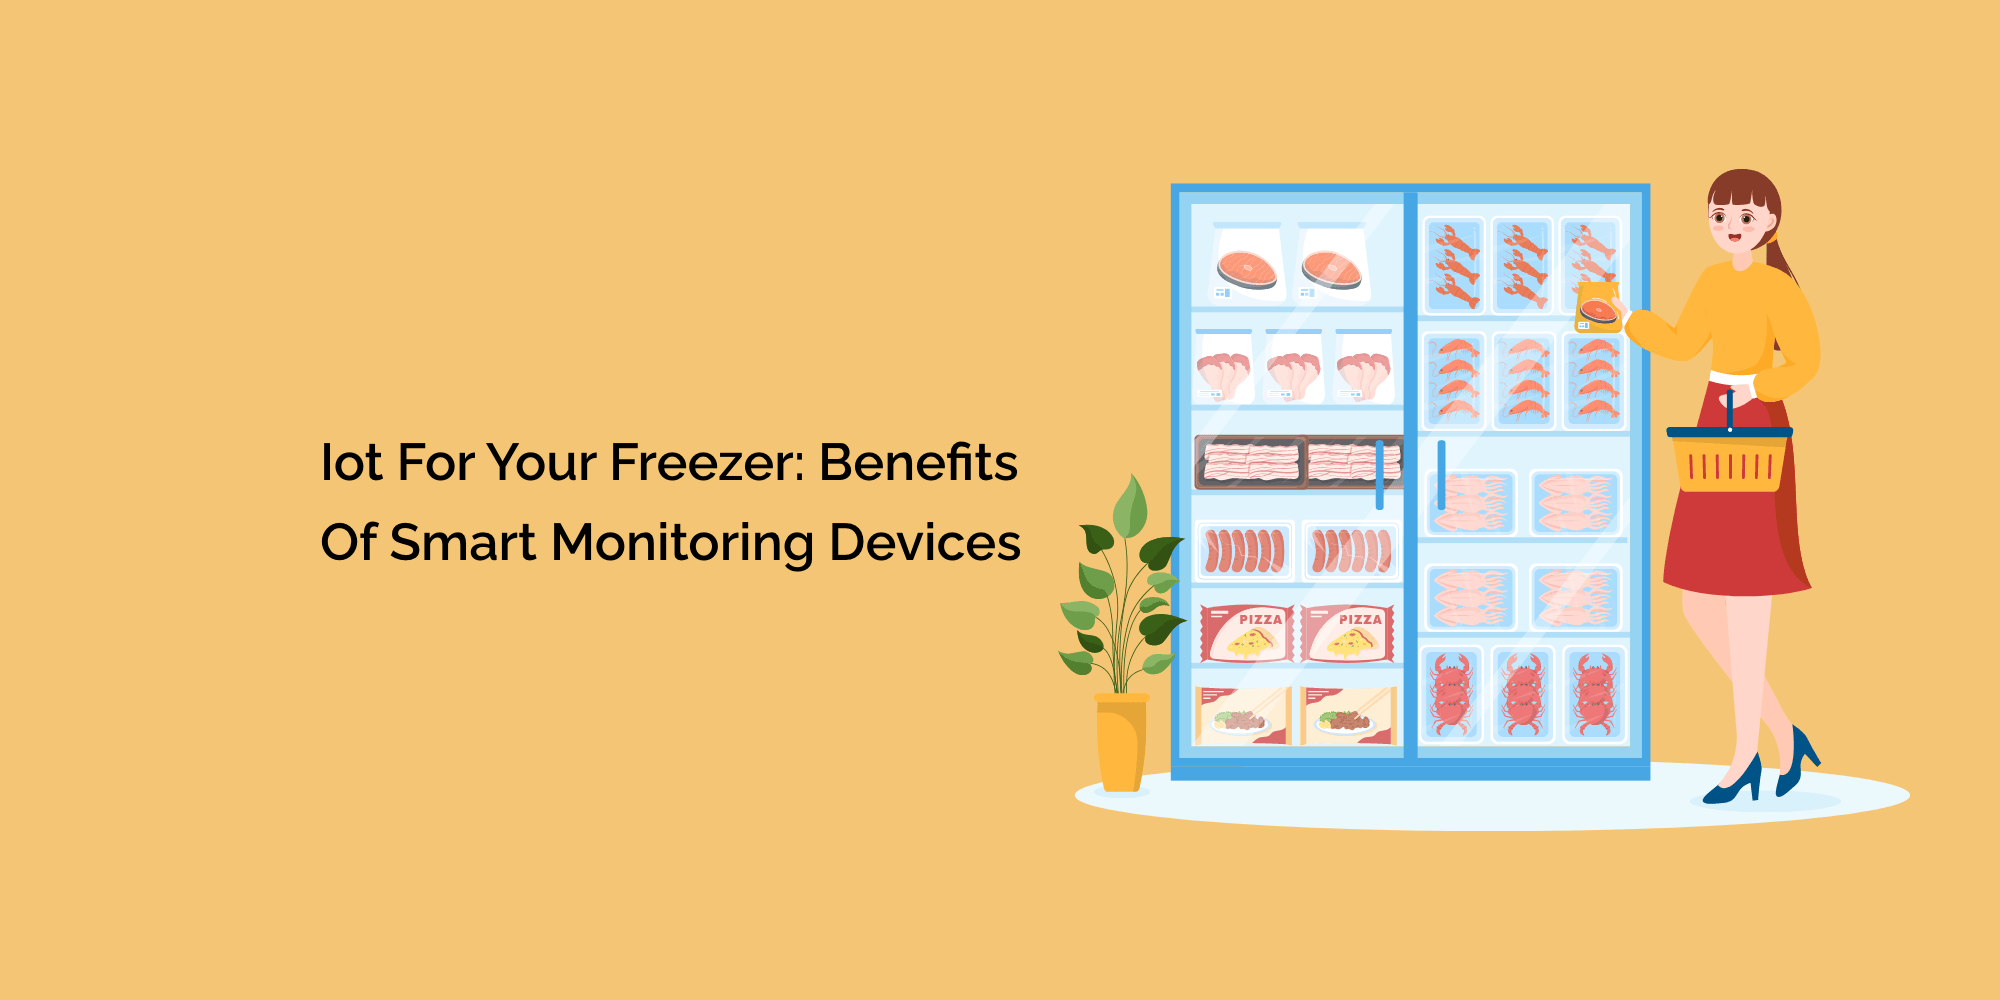 IoT For Your Freezer: Benefits of Smart Monitoring Devices